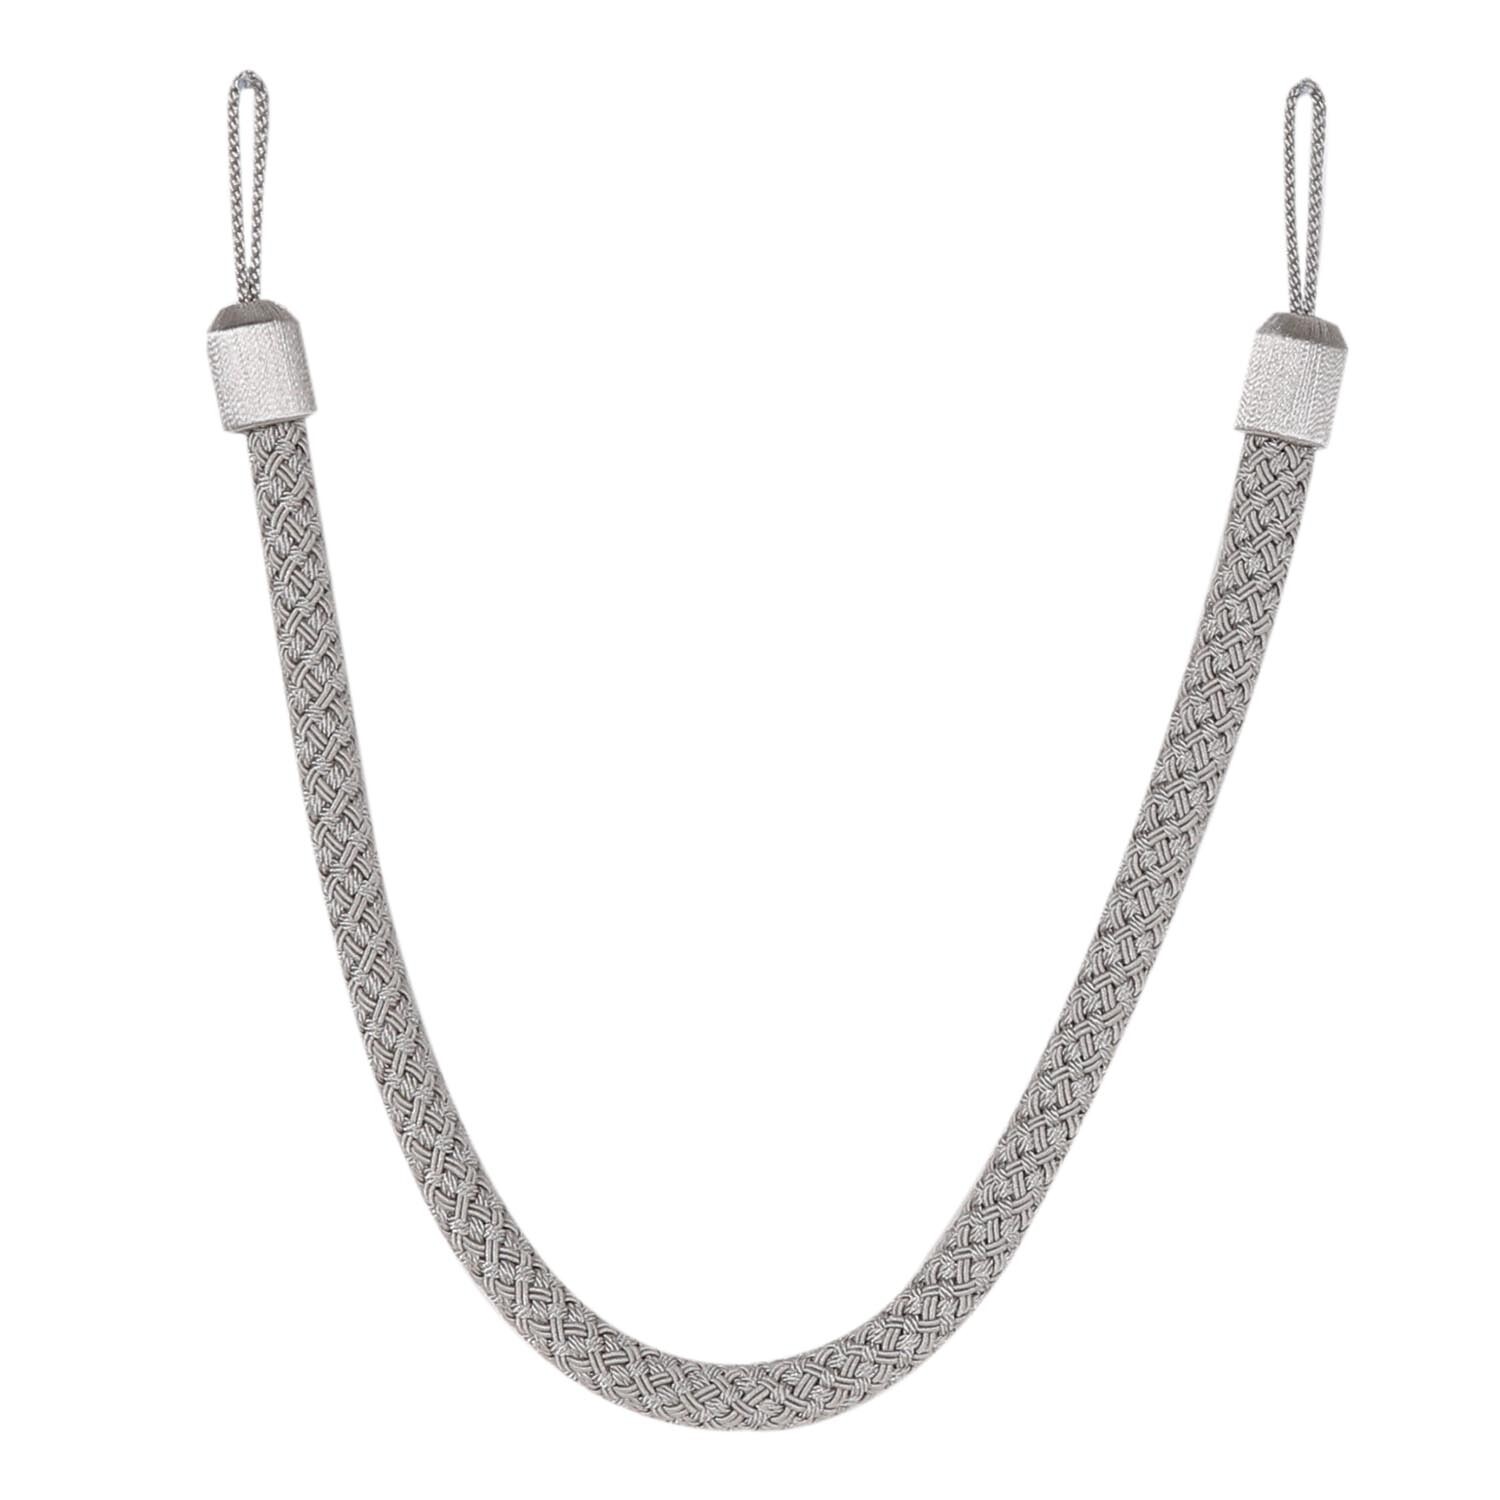 Silver Braided Rope Curtain Tie Back 70cm Image